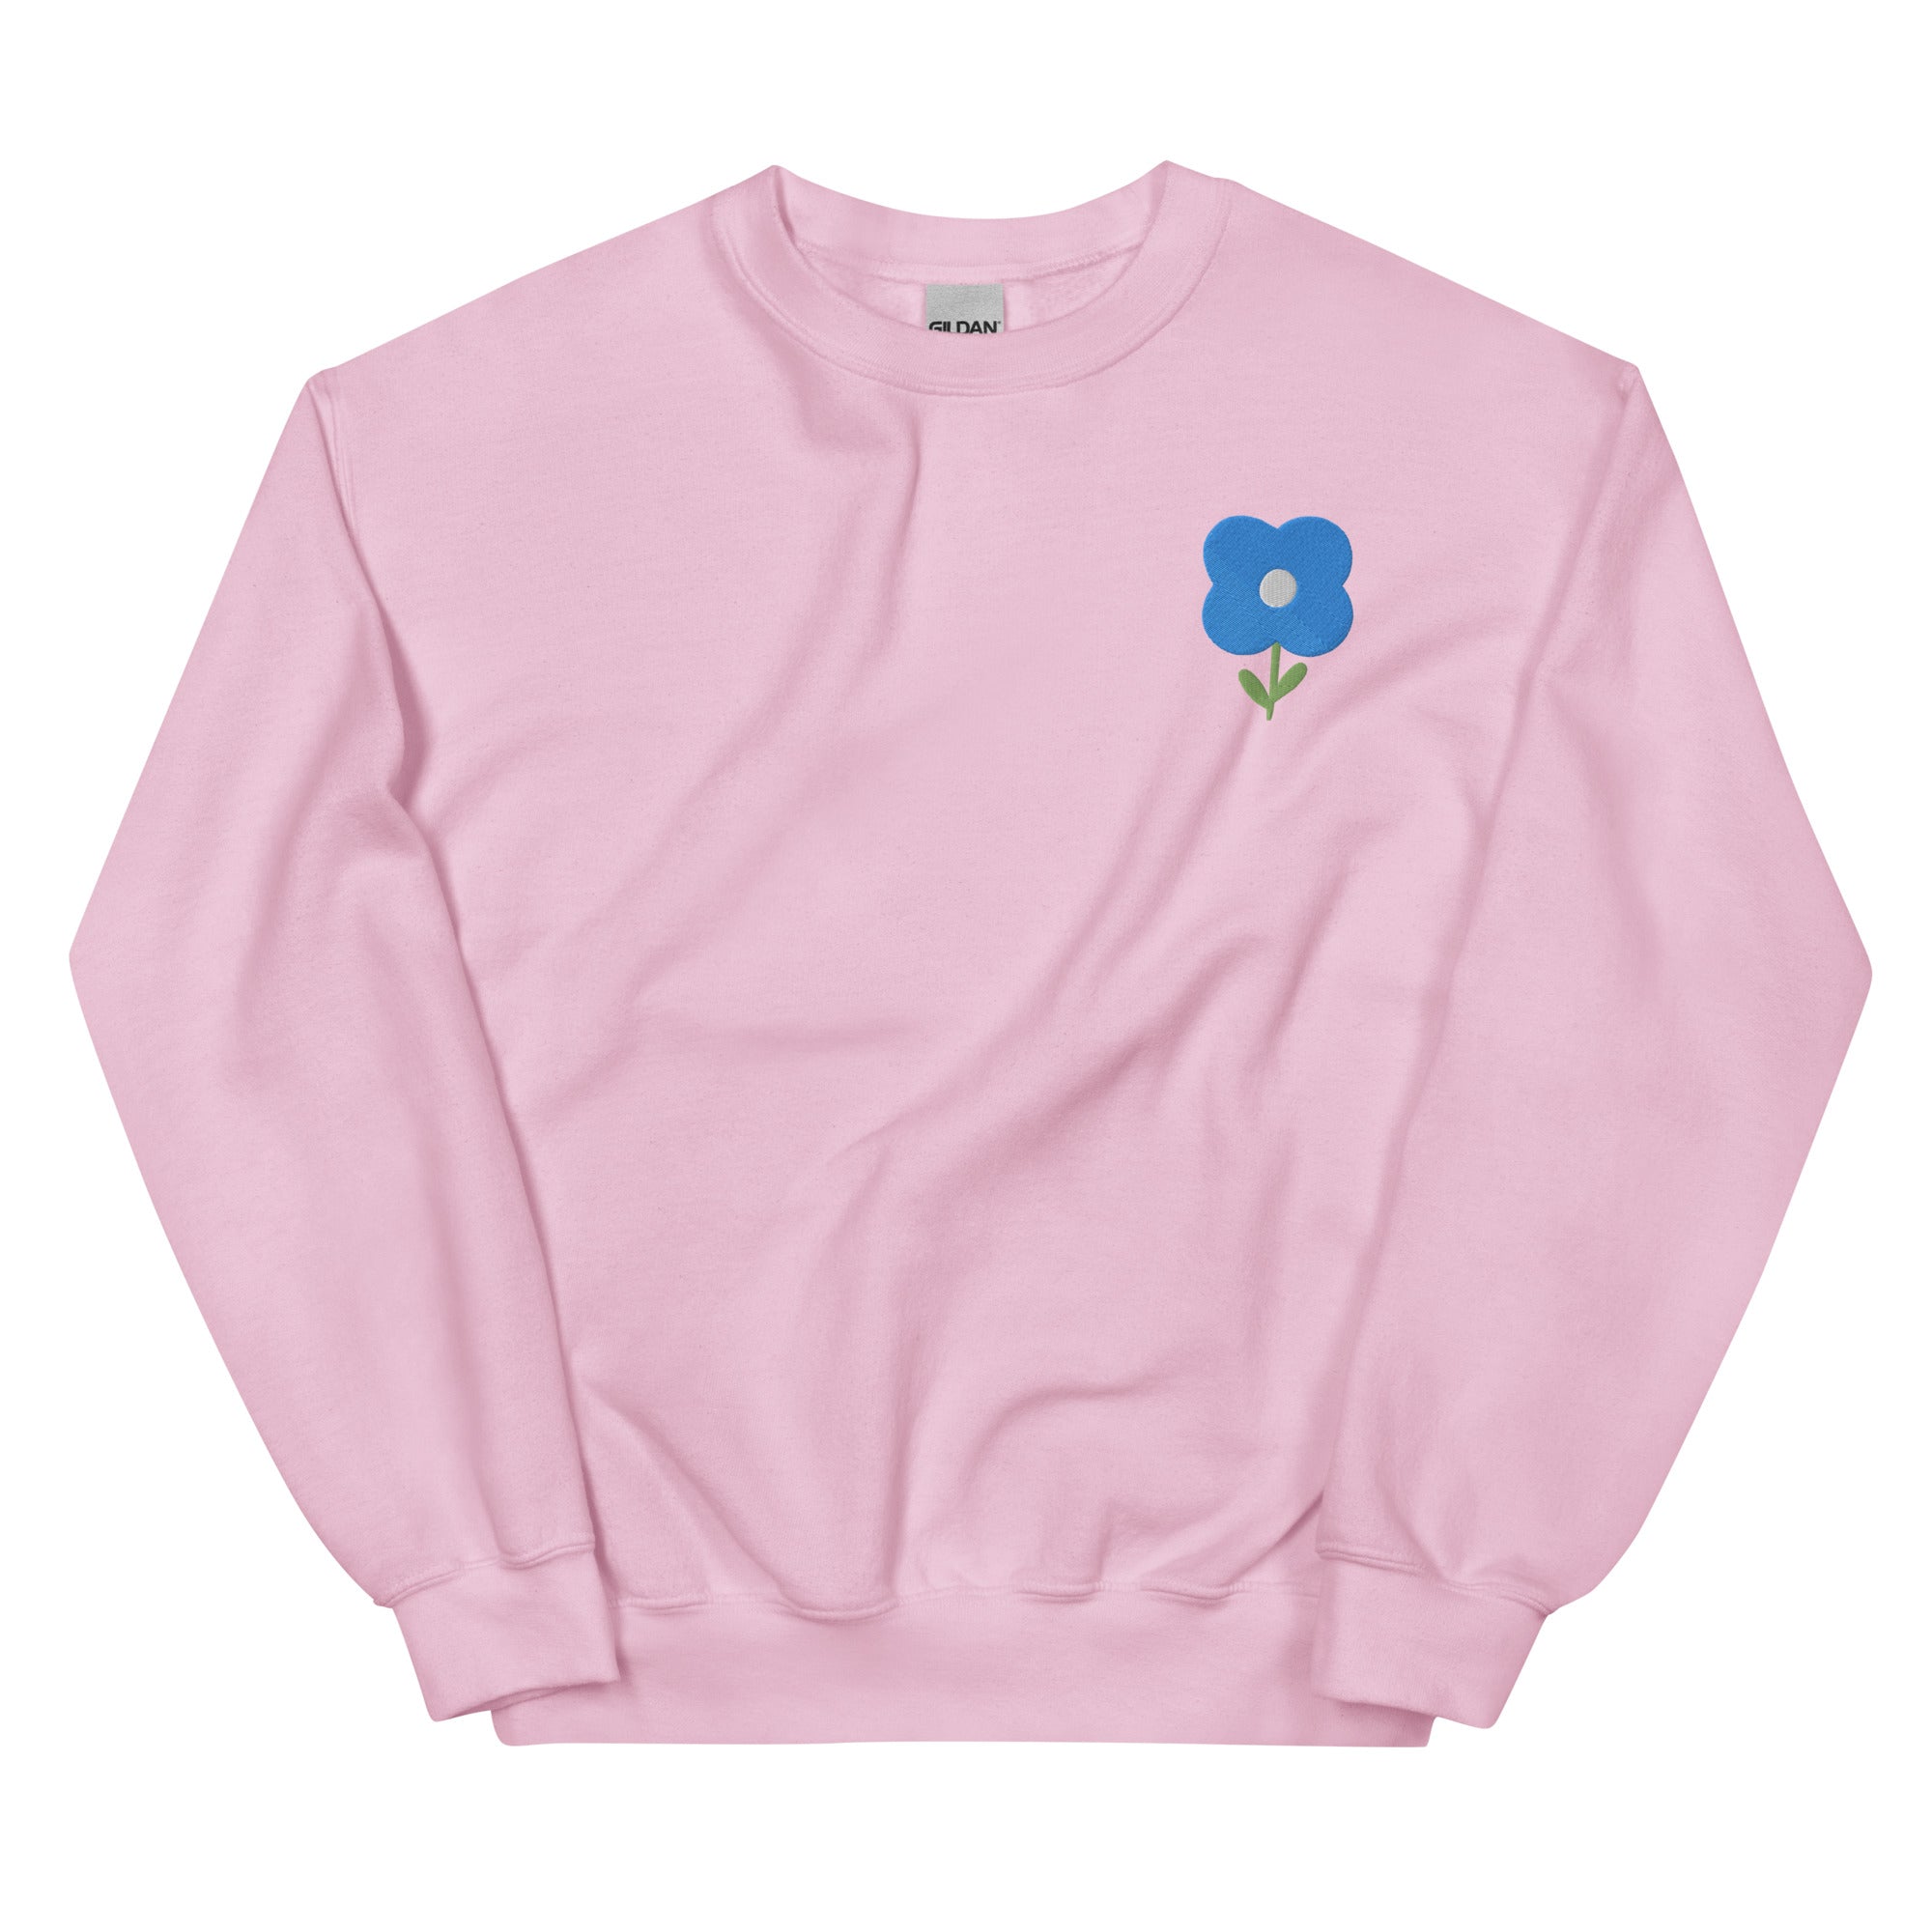 Blue Buttercup Embroidered Sweatshirt